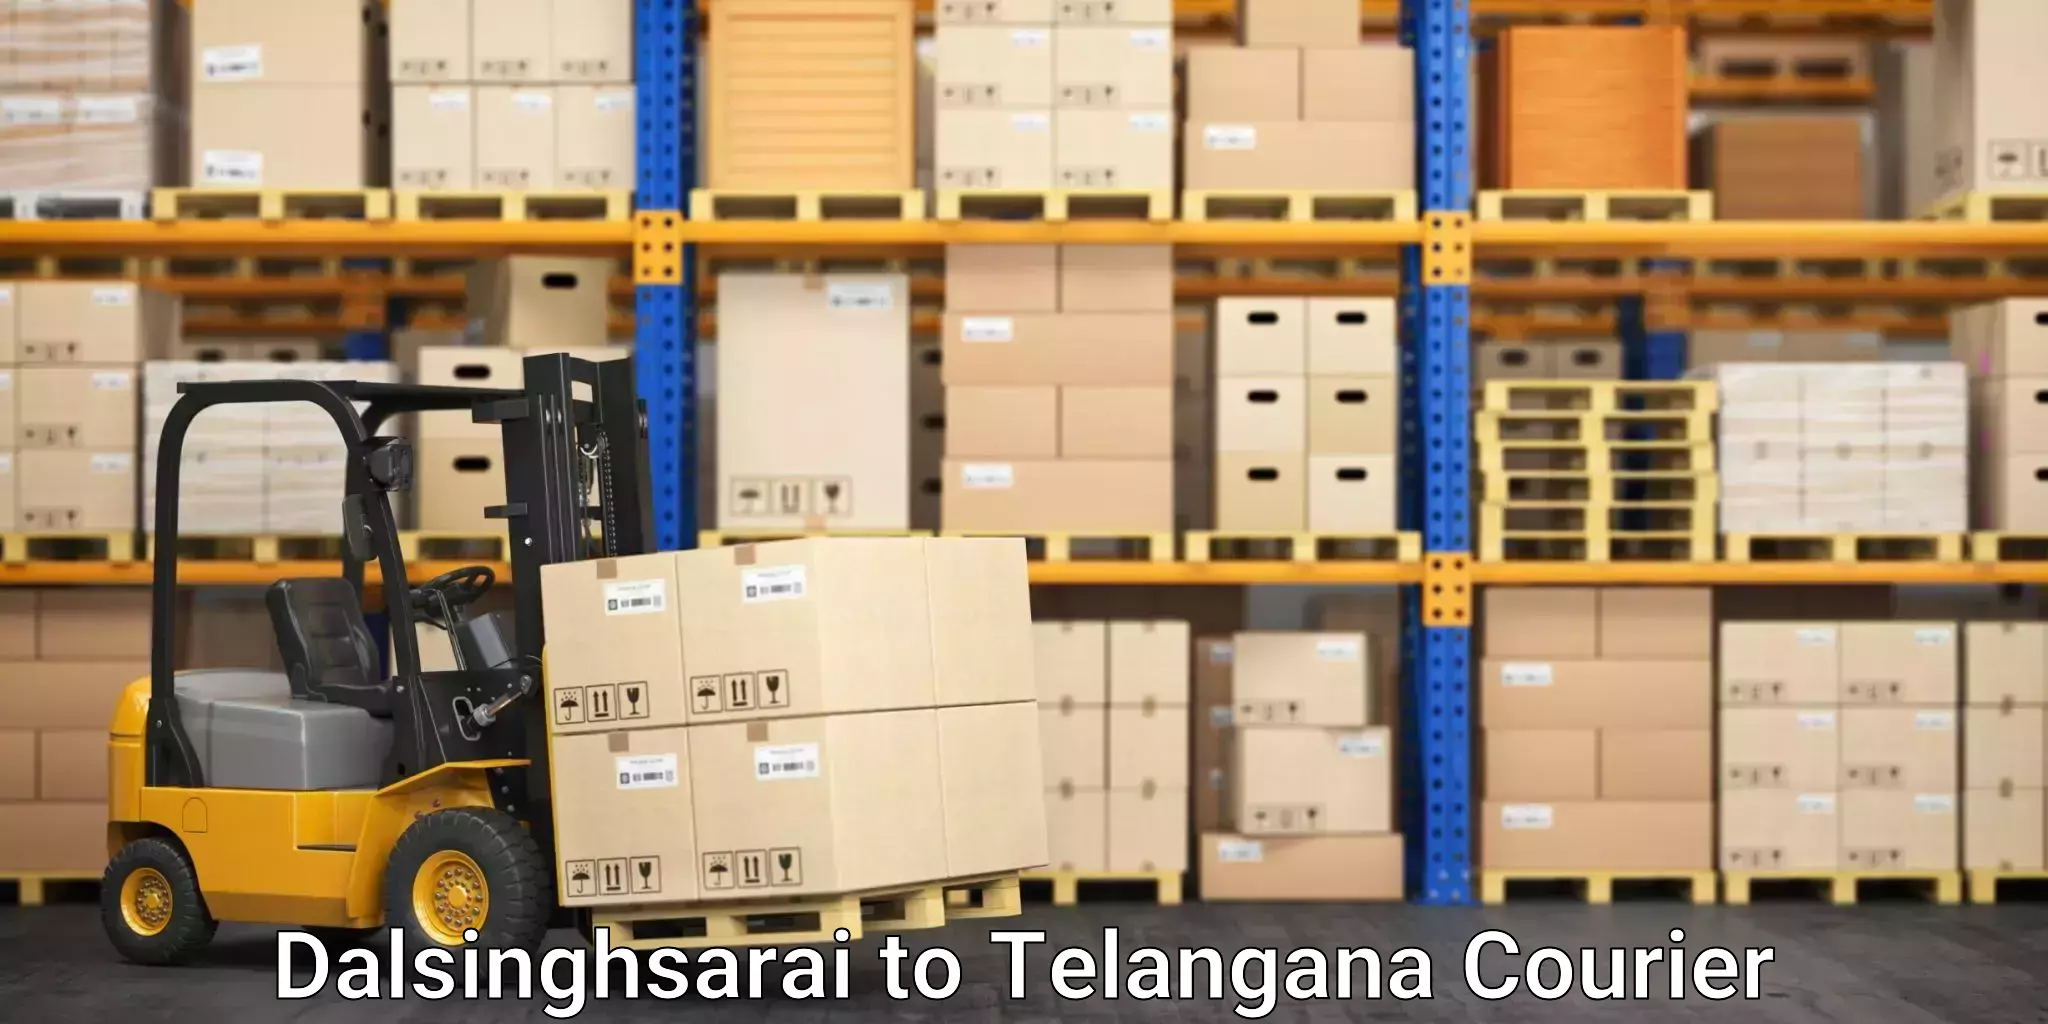 Budget-friendly moving services Dalsinghsarai to Shankarpalle